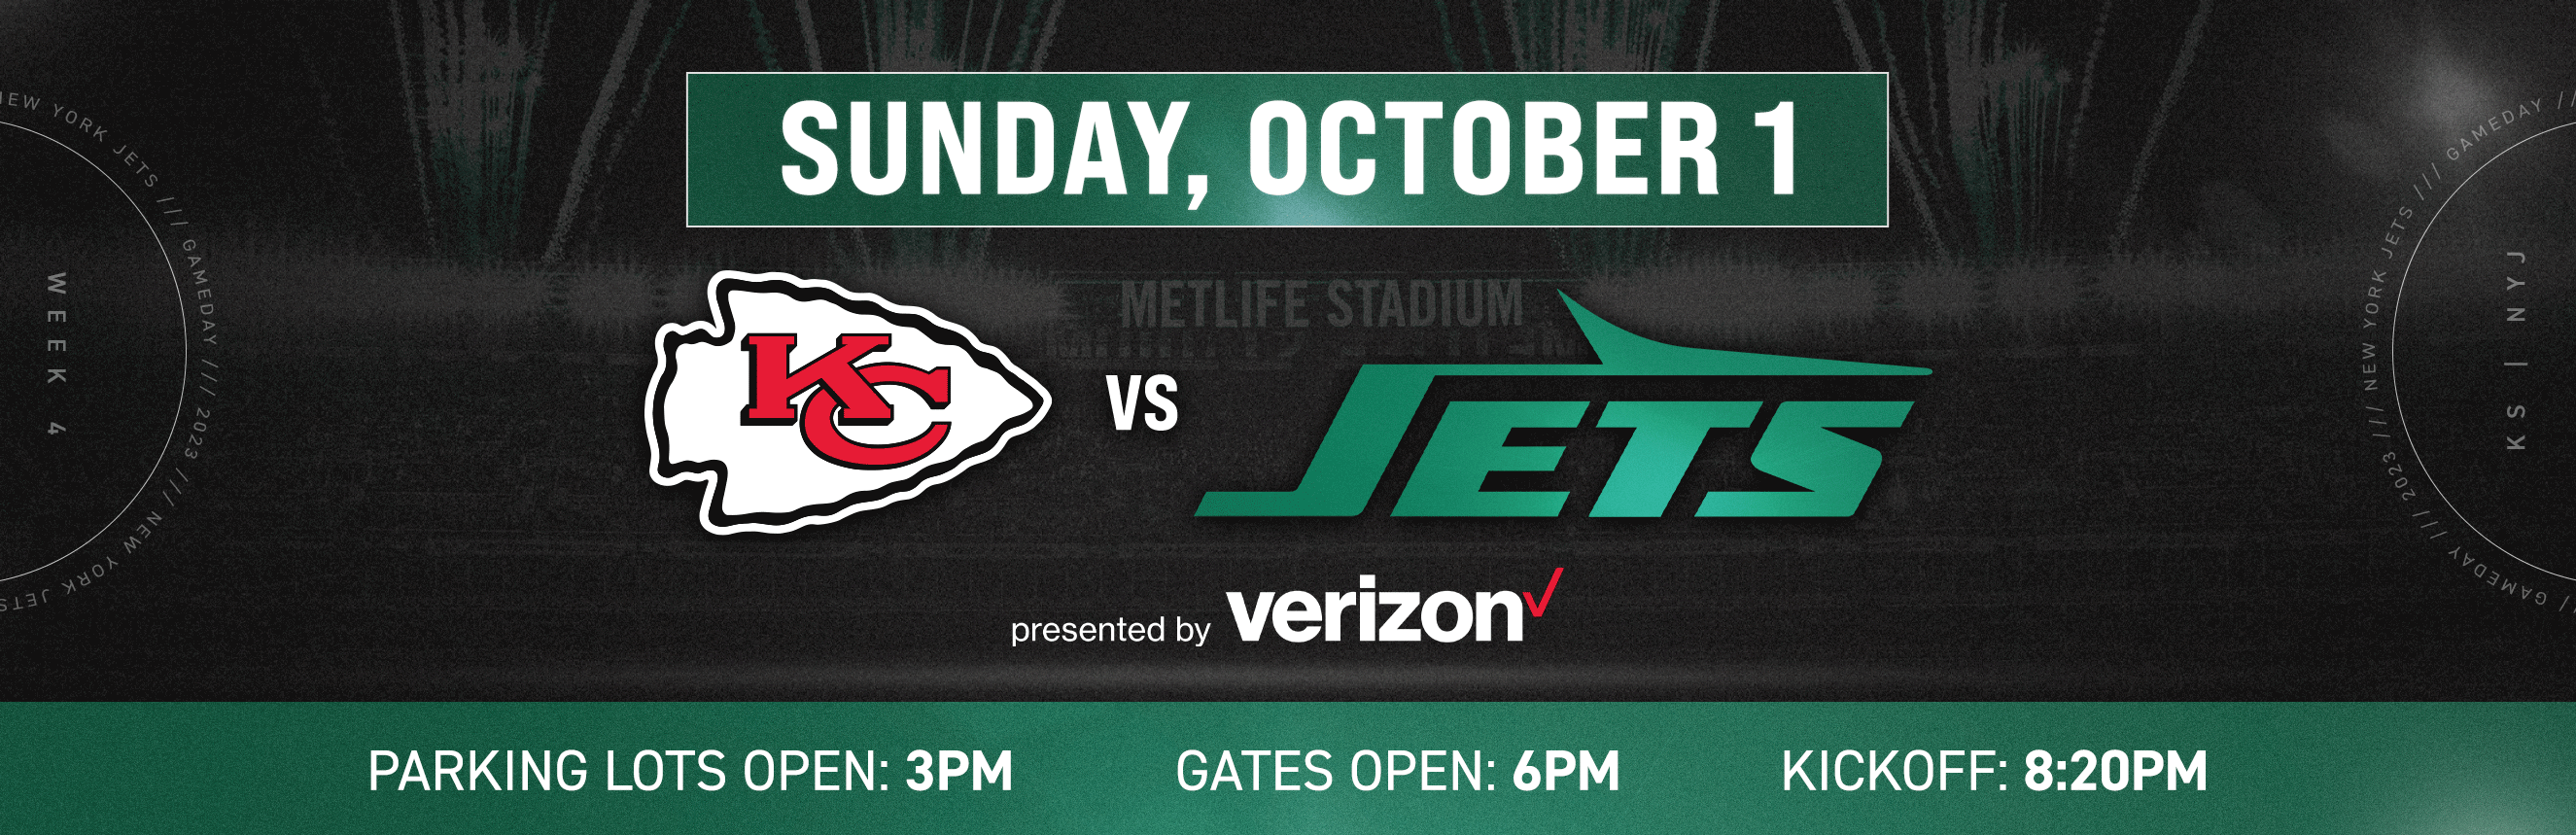 Get excited for the Jets Black Friday game with jerseys and gear